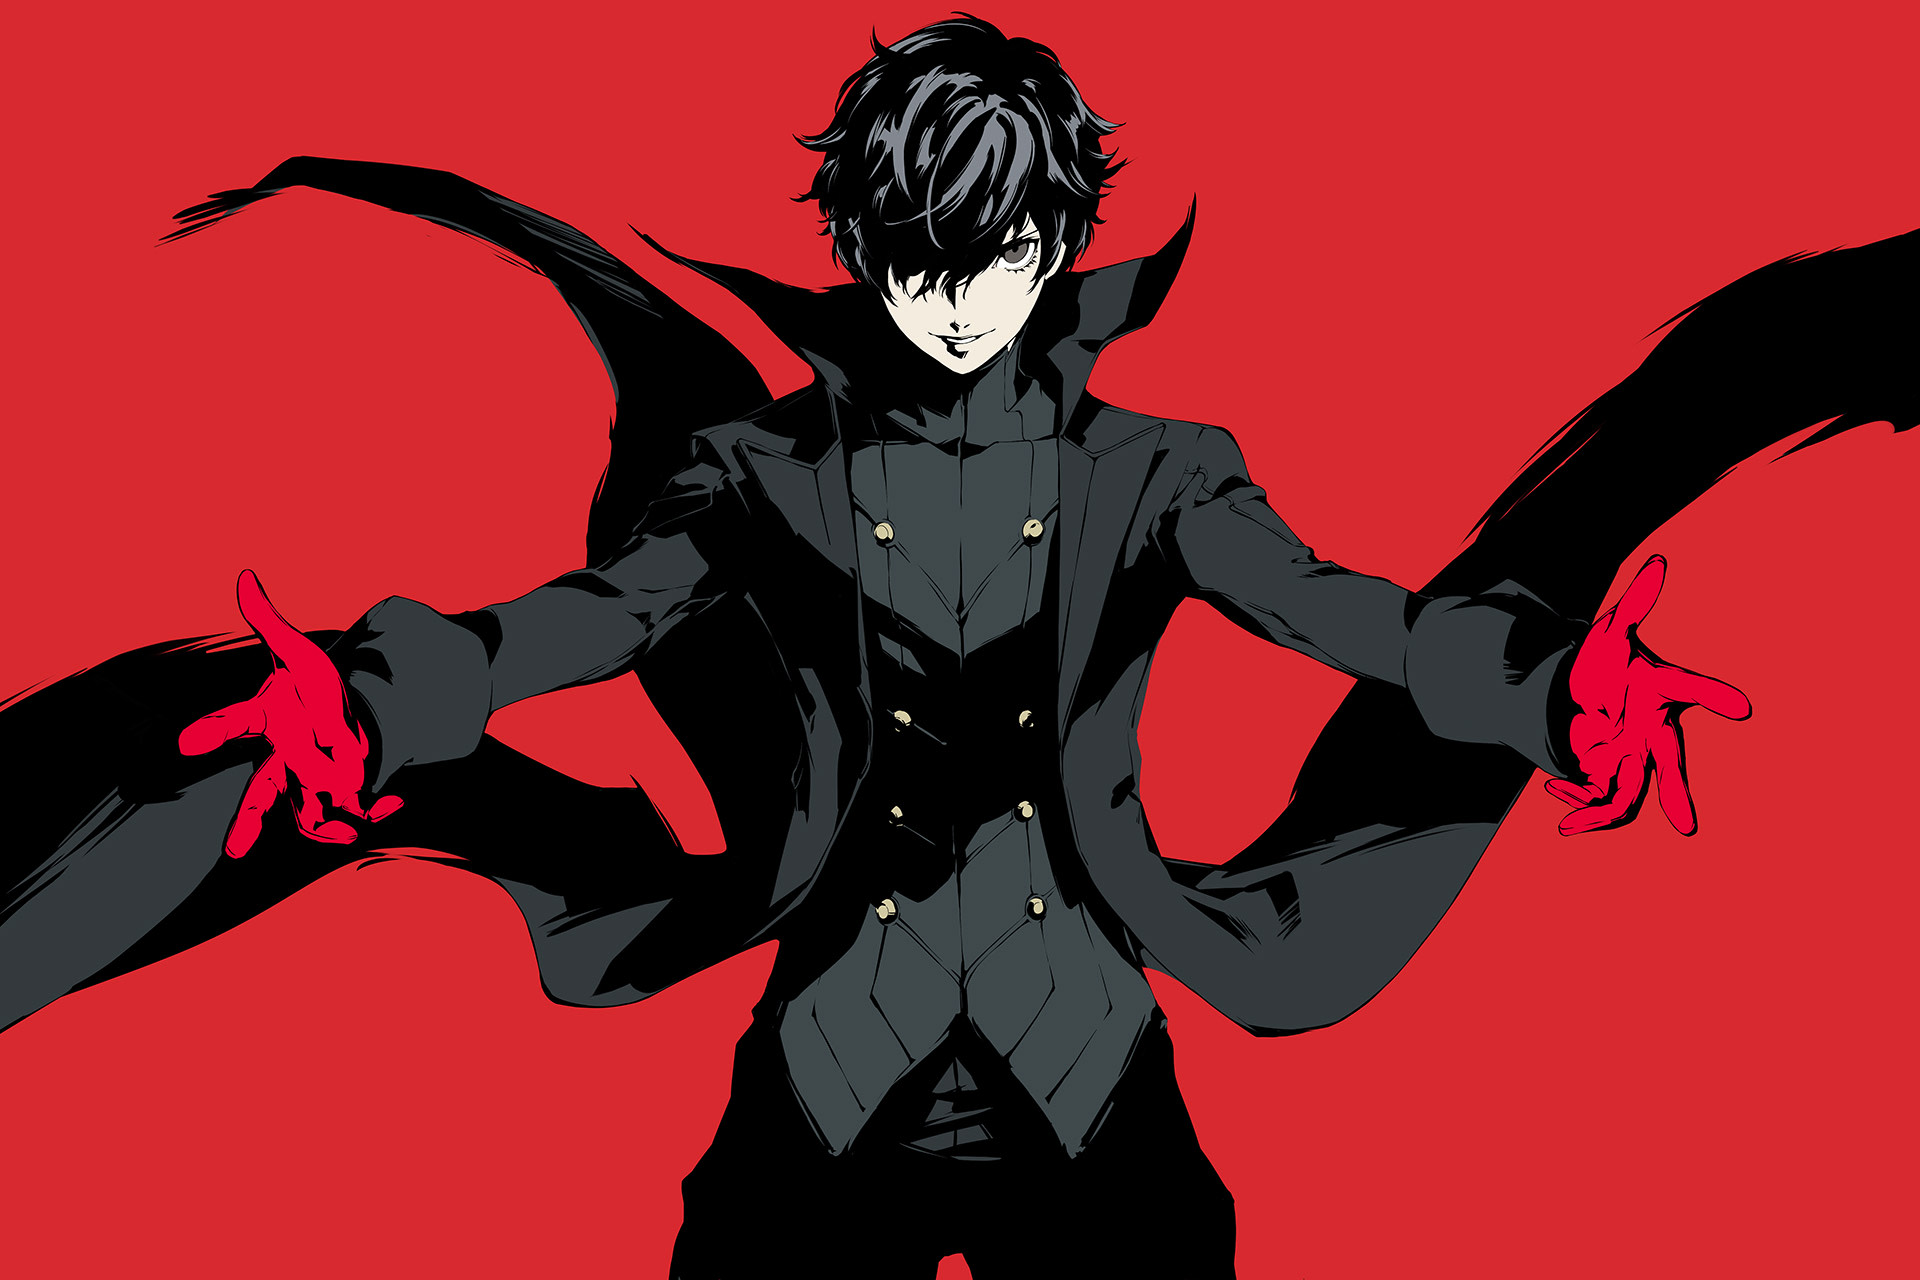 Persona 5's Bombastic Art Direction | Cook and Becker